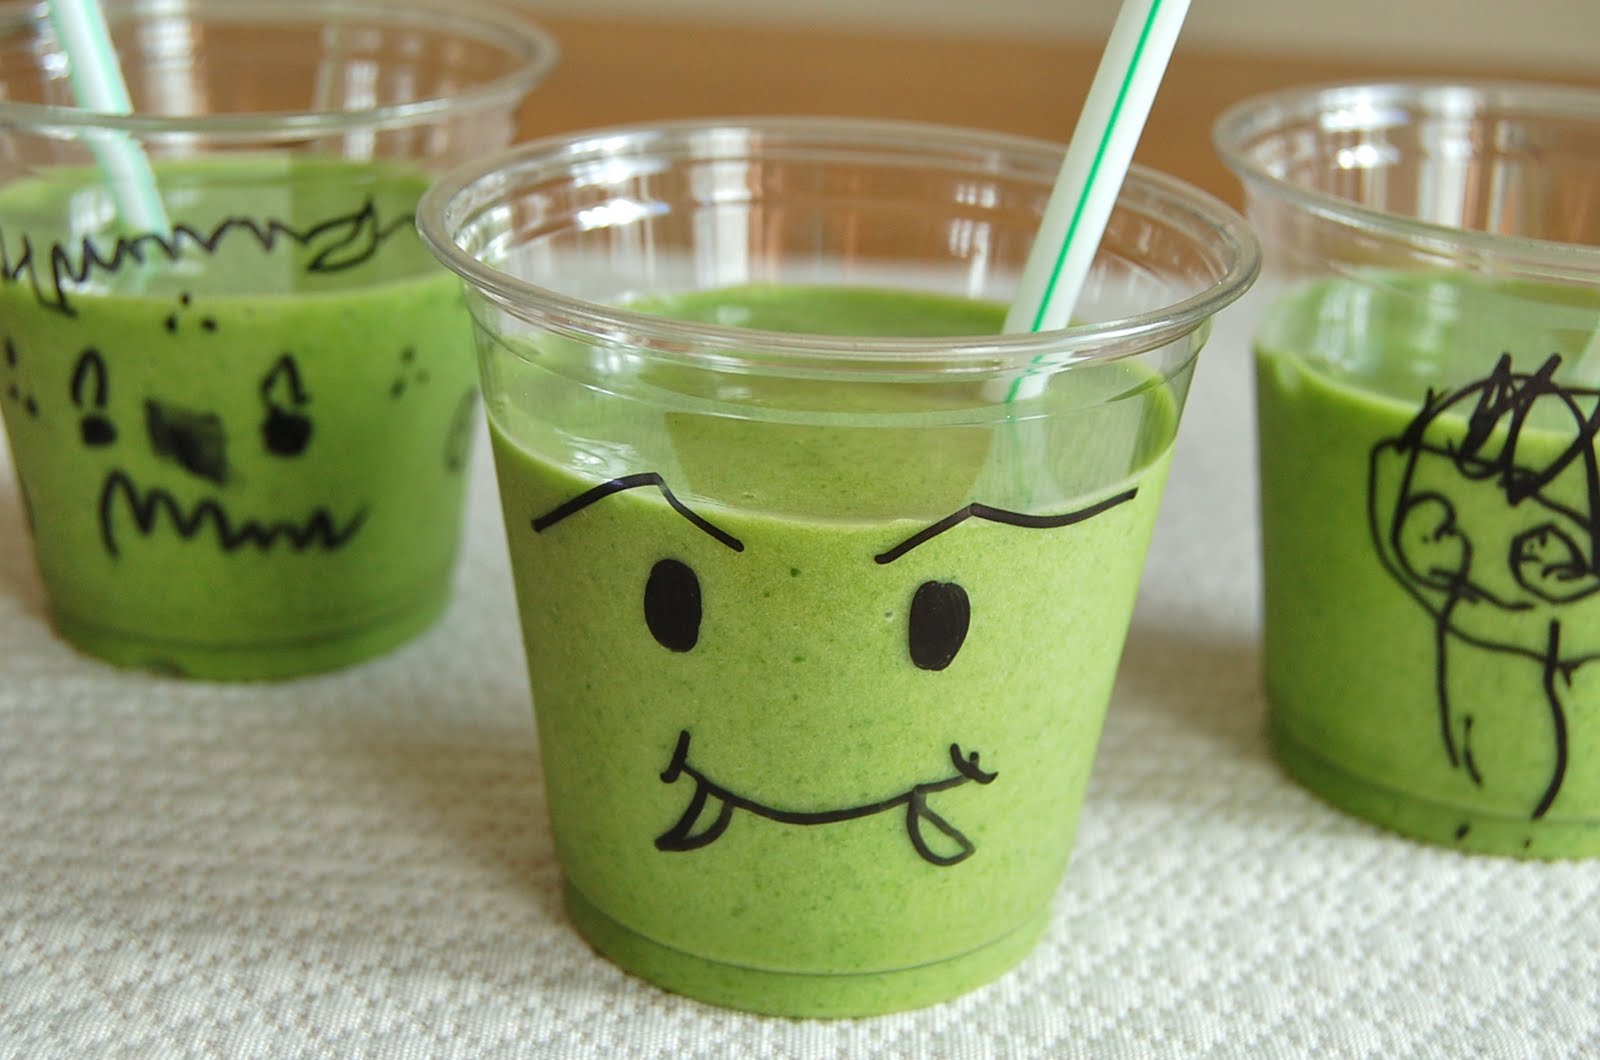 Chef Mommy: Green Monster Smoothie